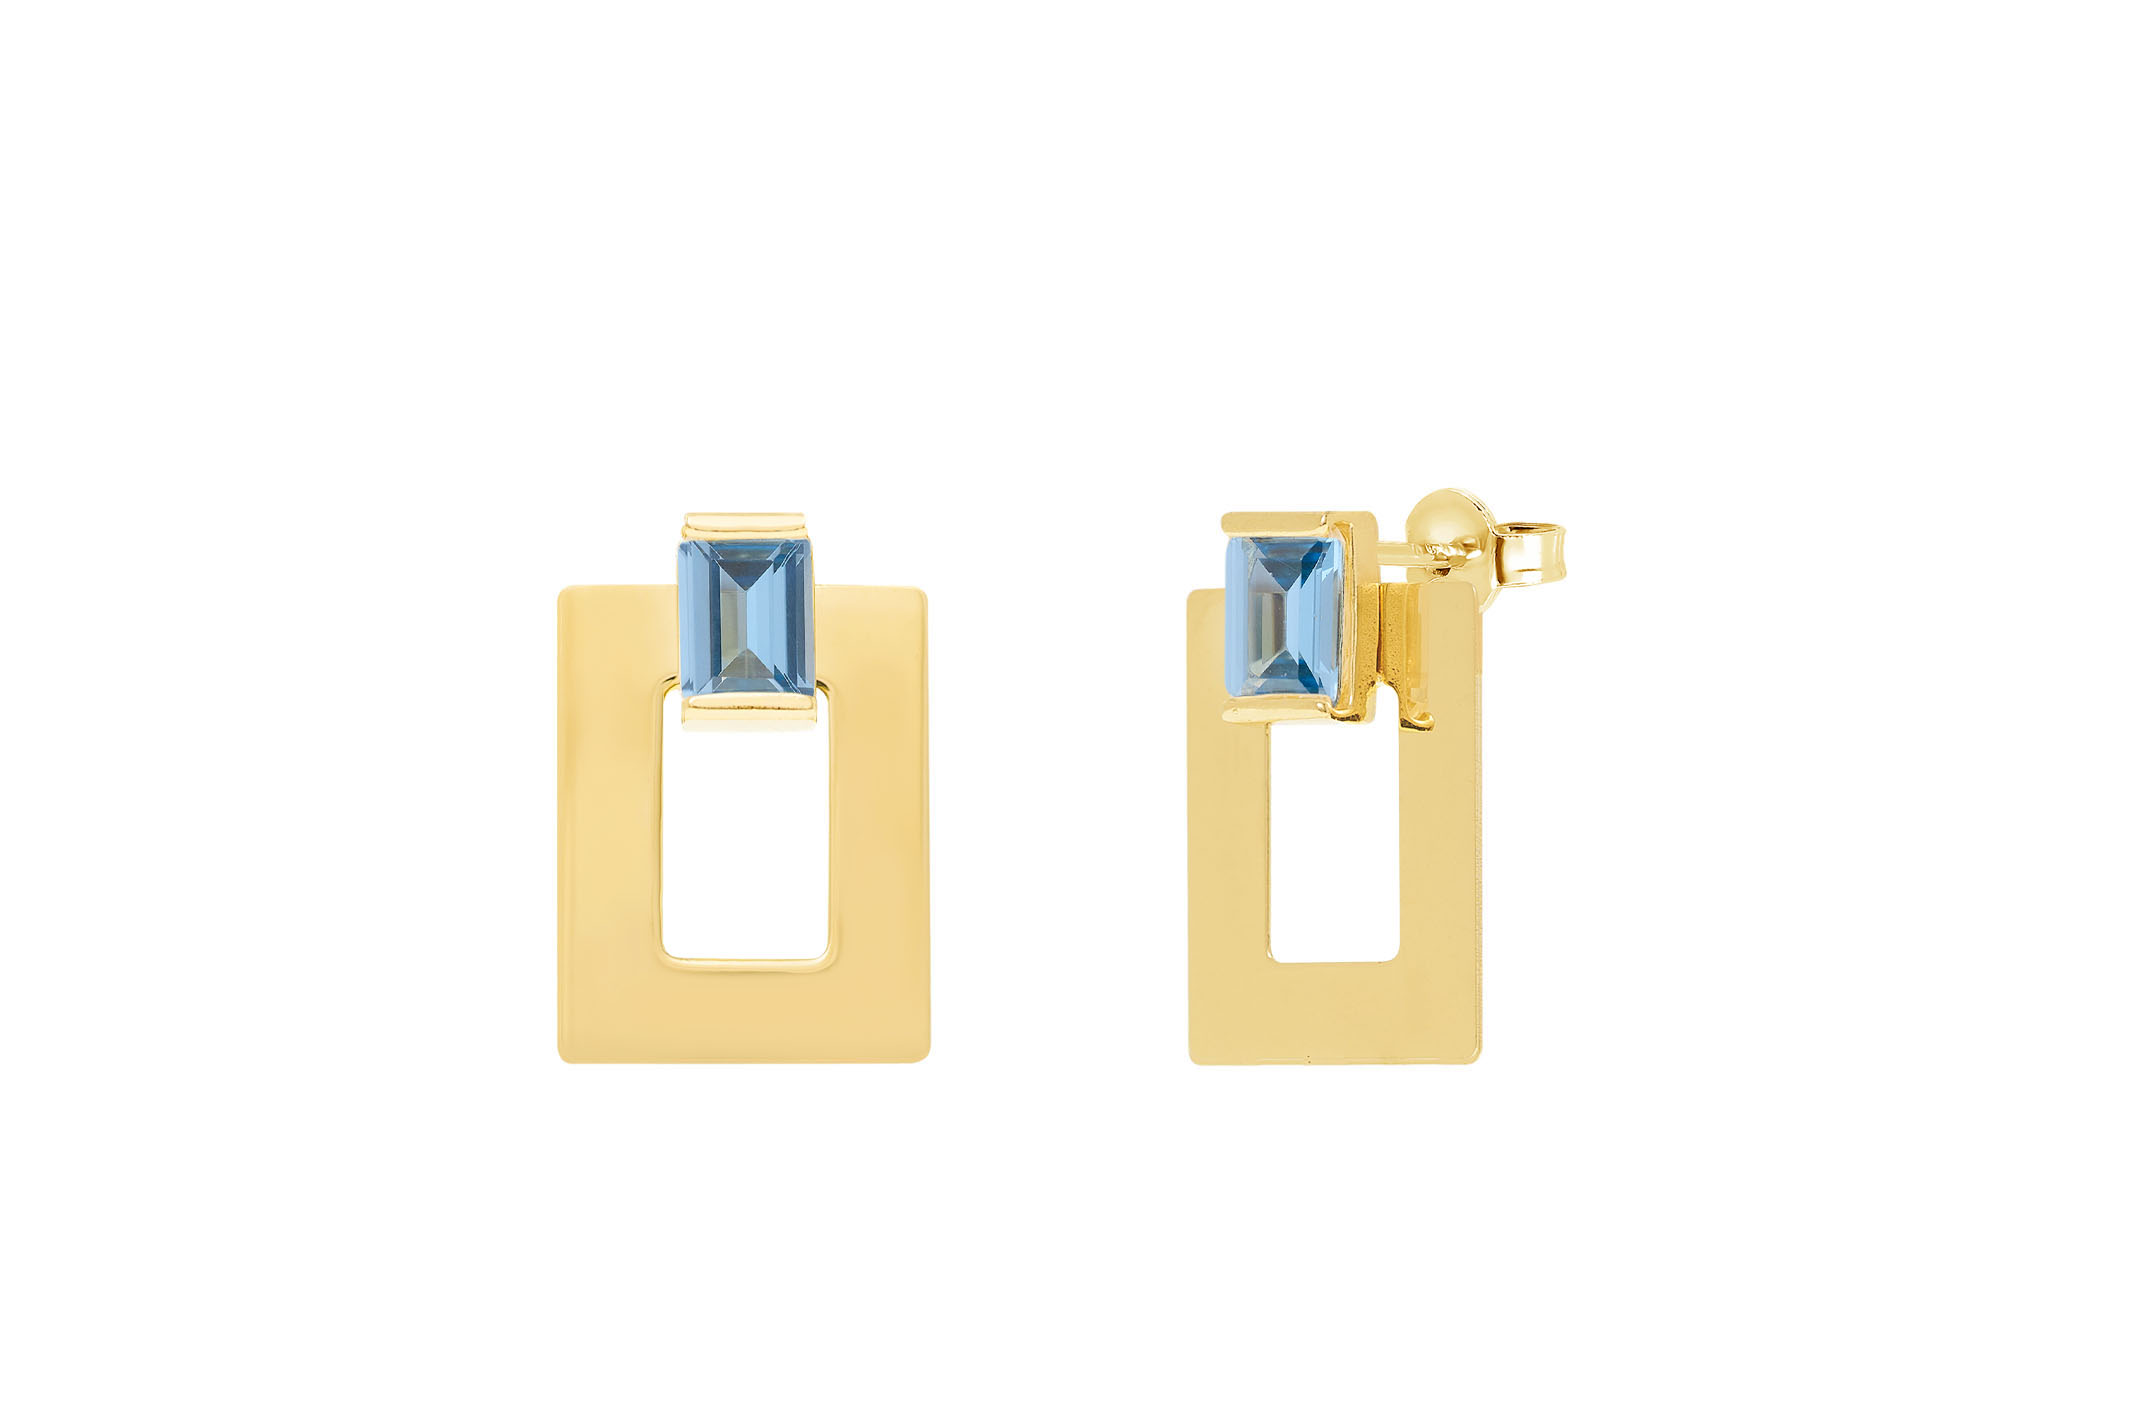 Jewel: earrings;Material: silver 925;Weight: 4.1 gr;Stone: zirconia;Color: yellow;Size: 2 cm